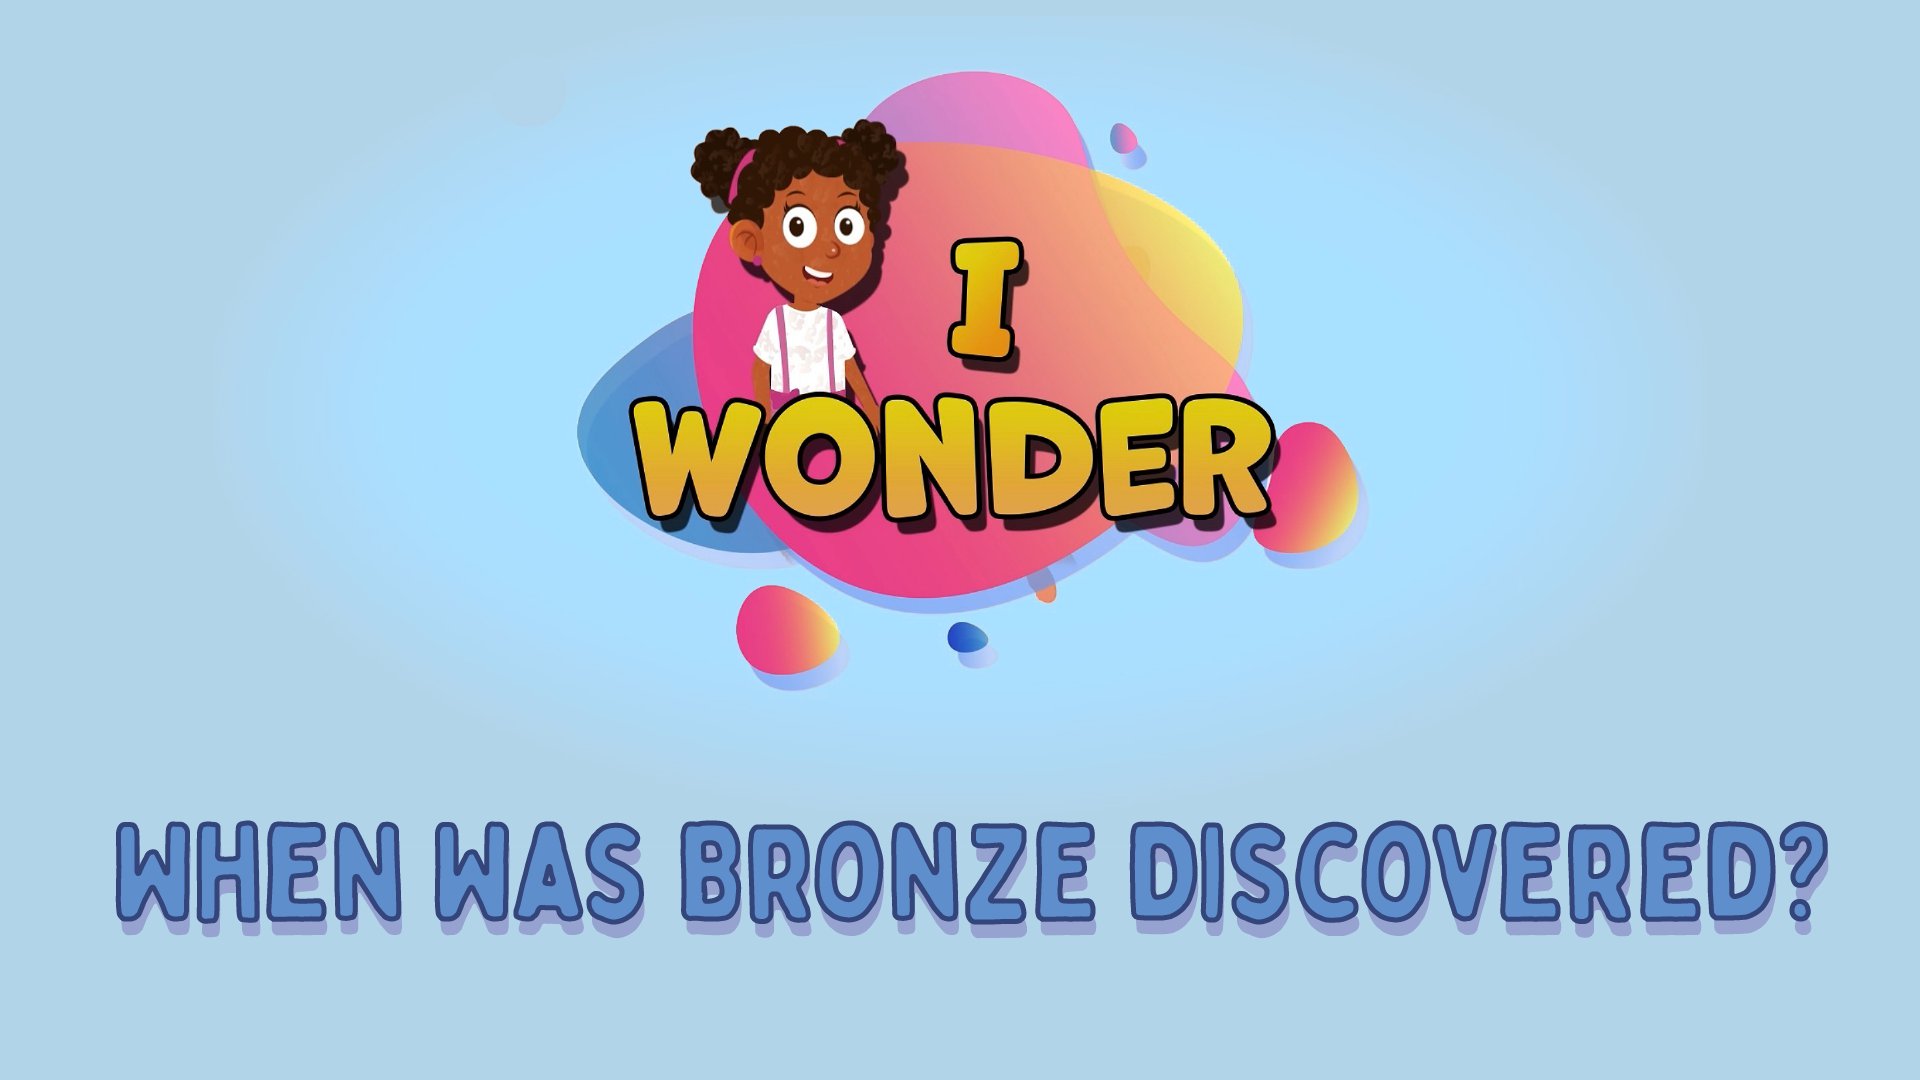 When Was Bronze Discovered?